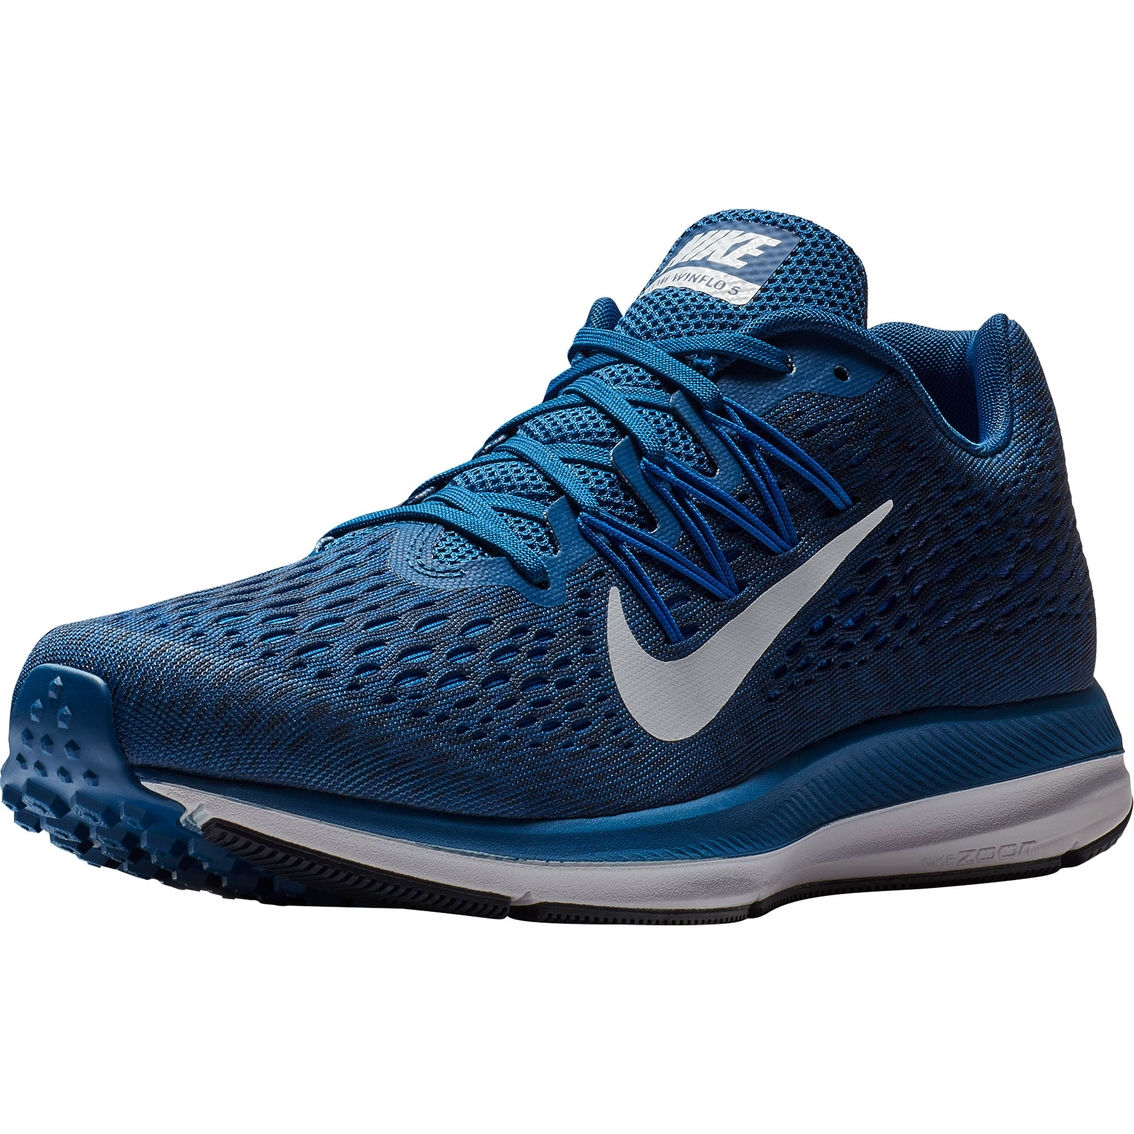 Nike Men's Air Zoom Winflo 5 Running Shoes | Running | Shoes | Shop The ...